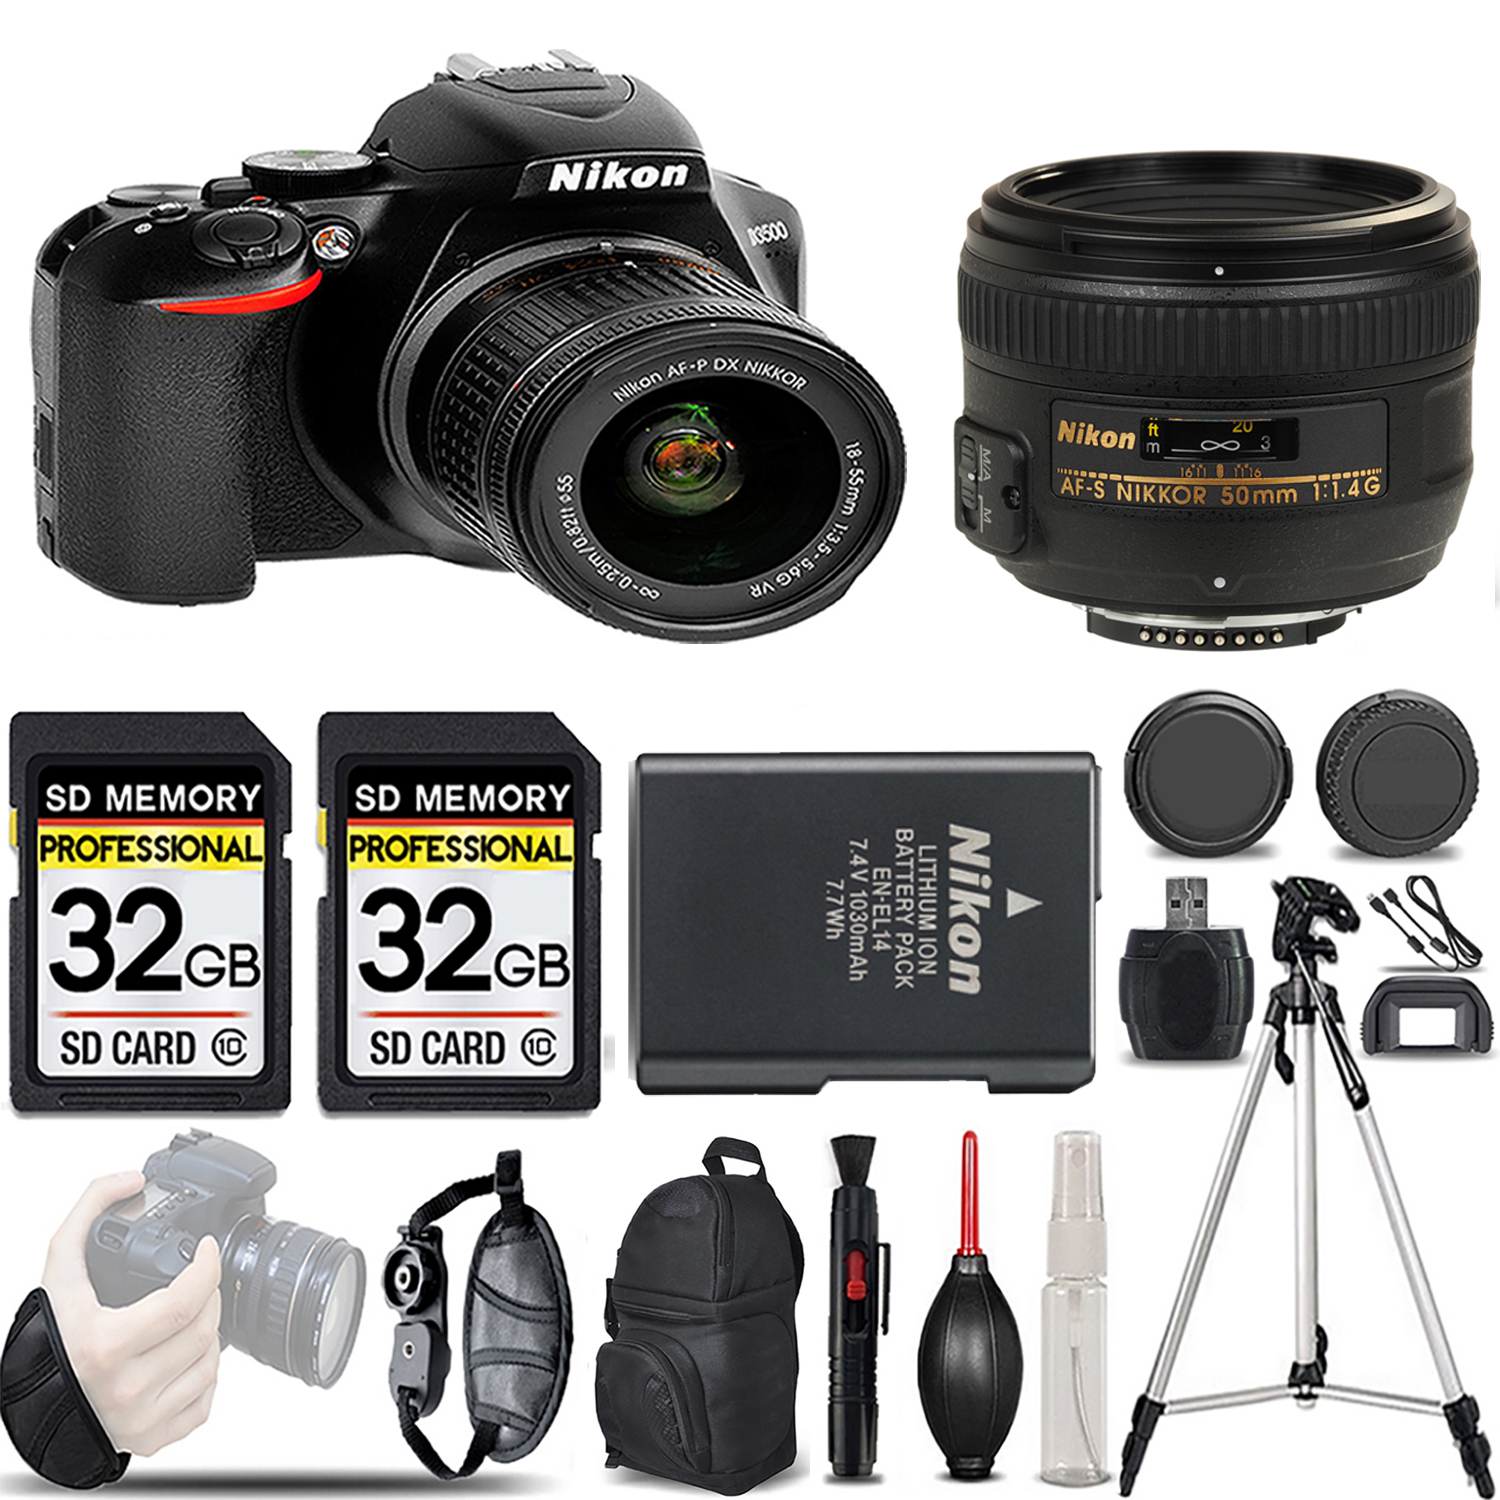 D3500 DSLR Camera with 18-55mm Lens + 50mm f/1.4G Lens - LOADED KIT *FREE SHIPPING*